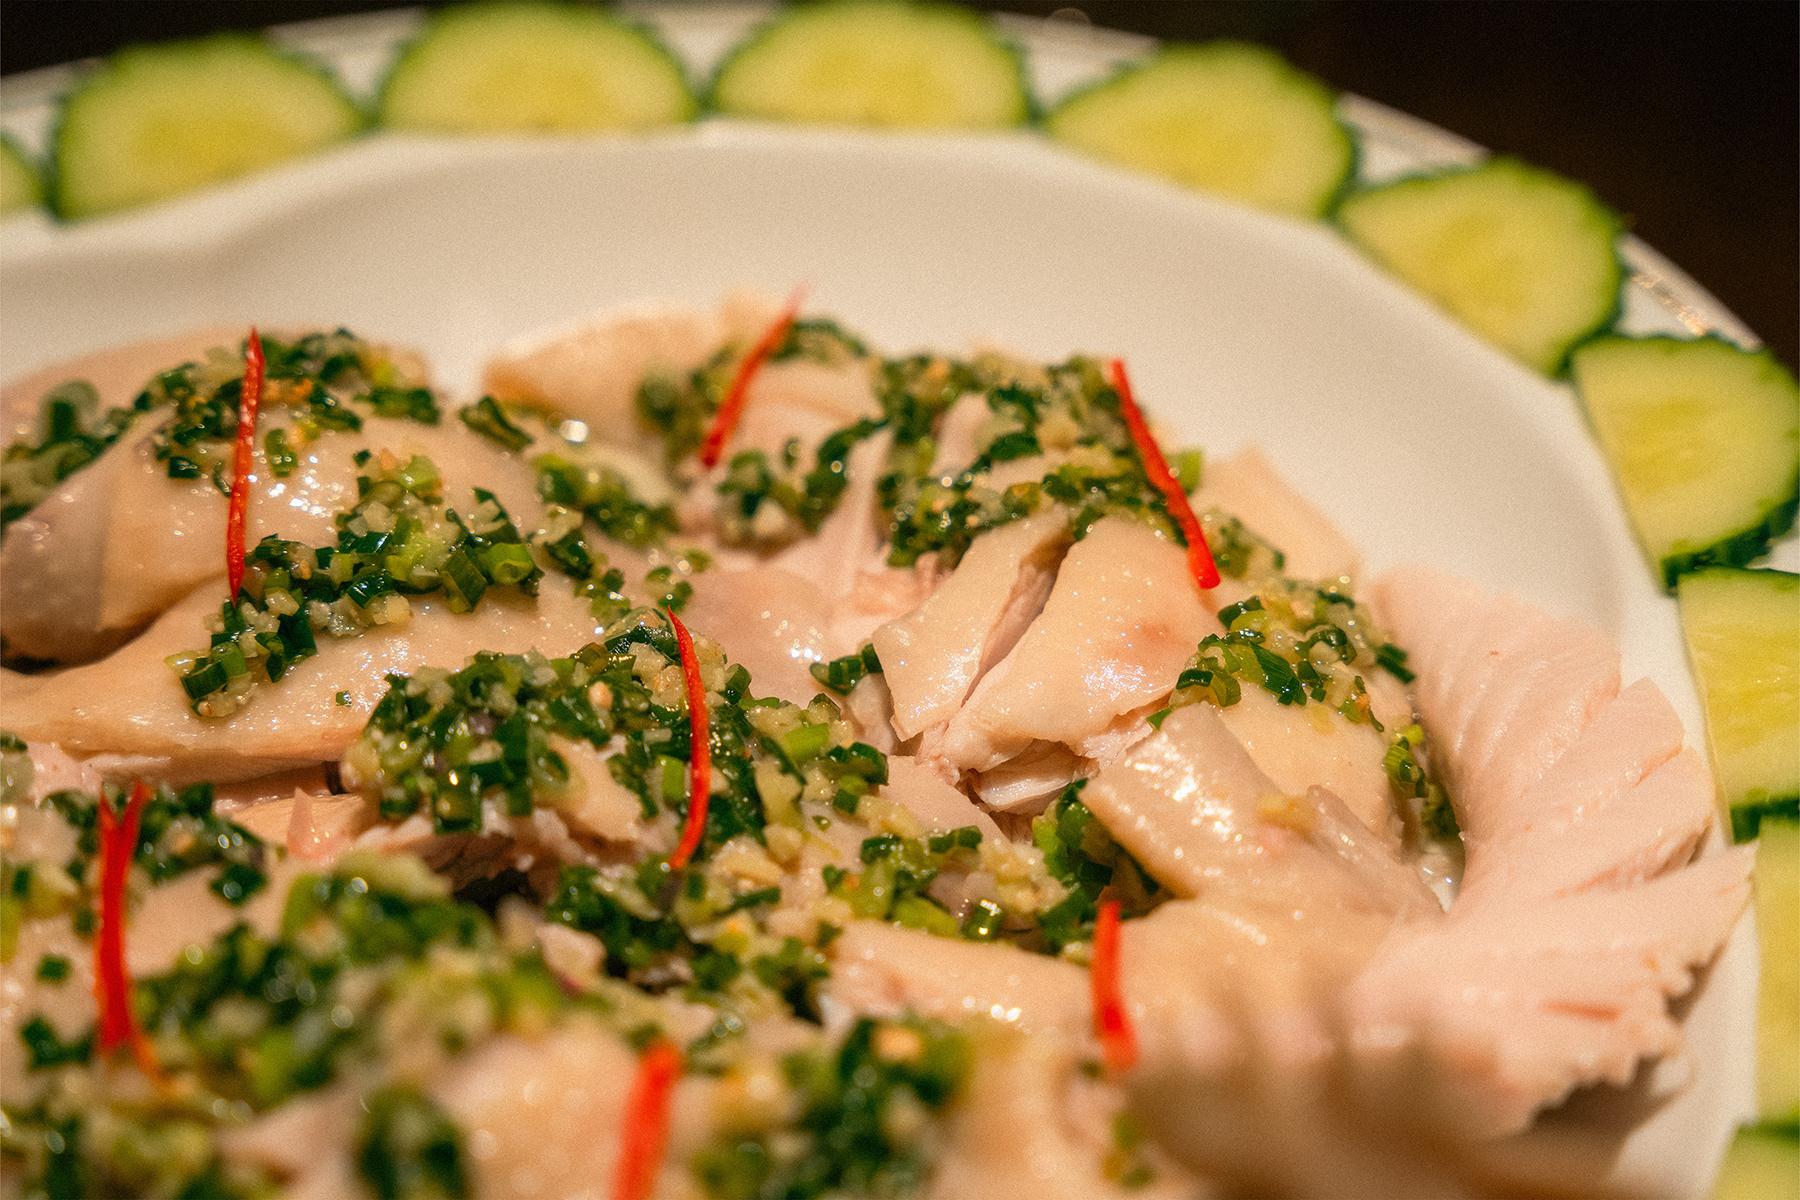 Recipe: ArChan's Hong Kong-Style Poached Chicken with Sand Ginger